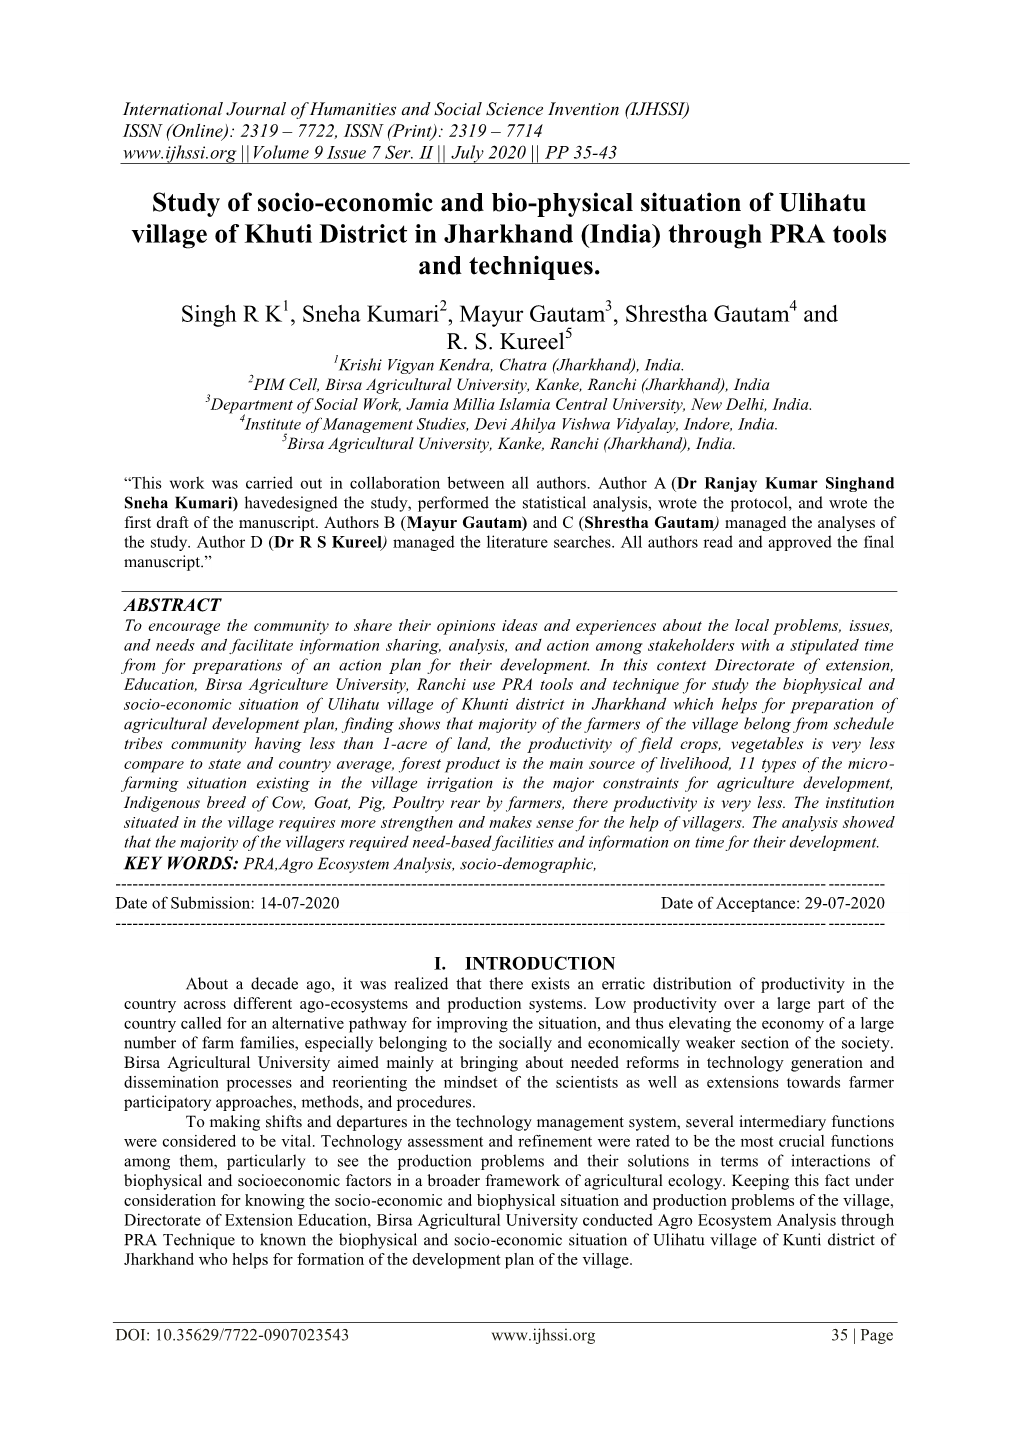 Study of Socio-Economic and Bio-Physical Situation of Ulihatu Village of Khuti District in Jharkhand (India) Through PRA Tools and Techniques